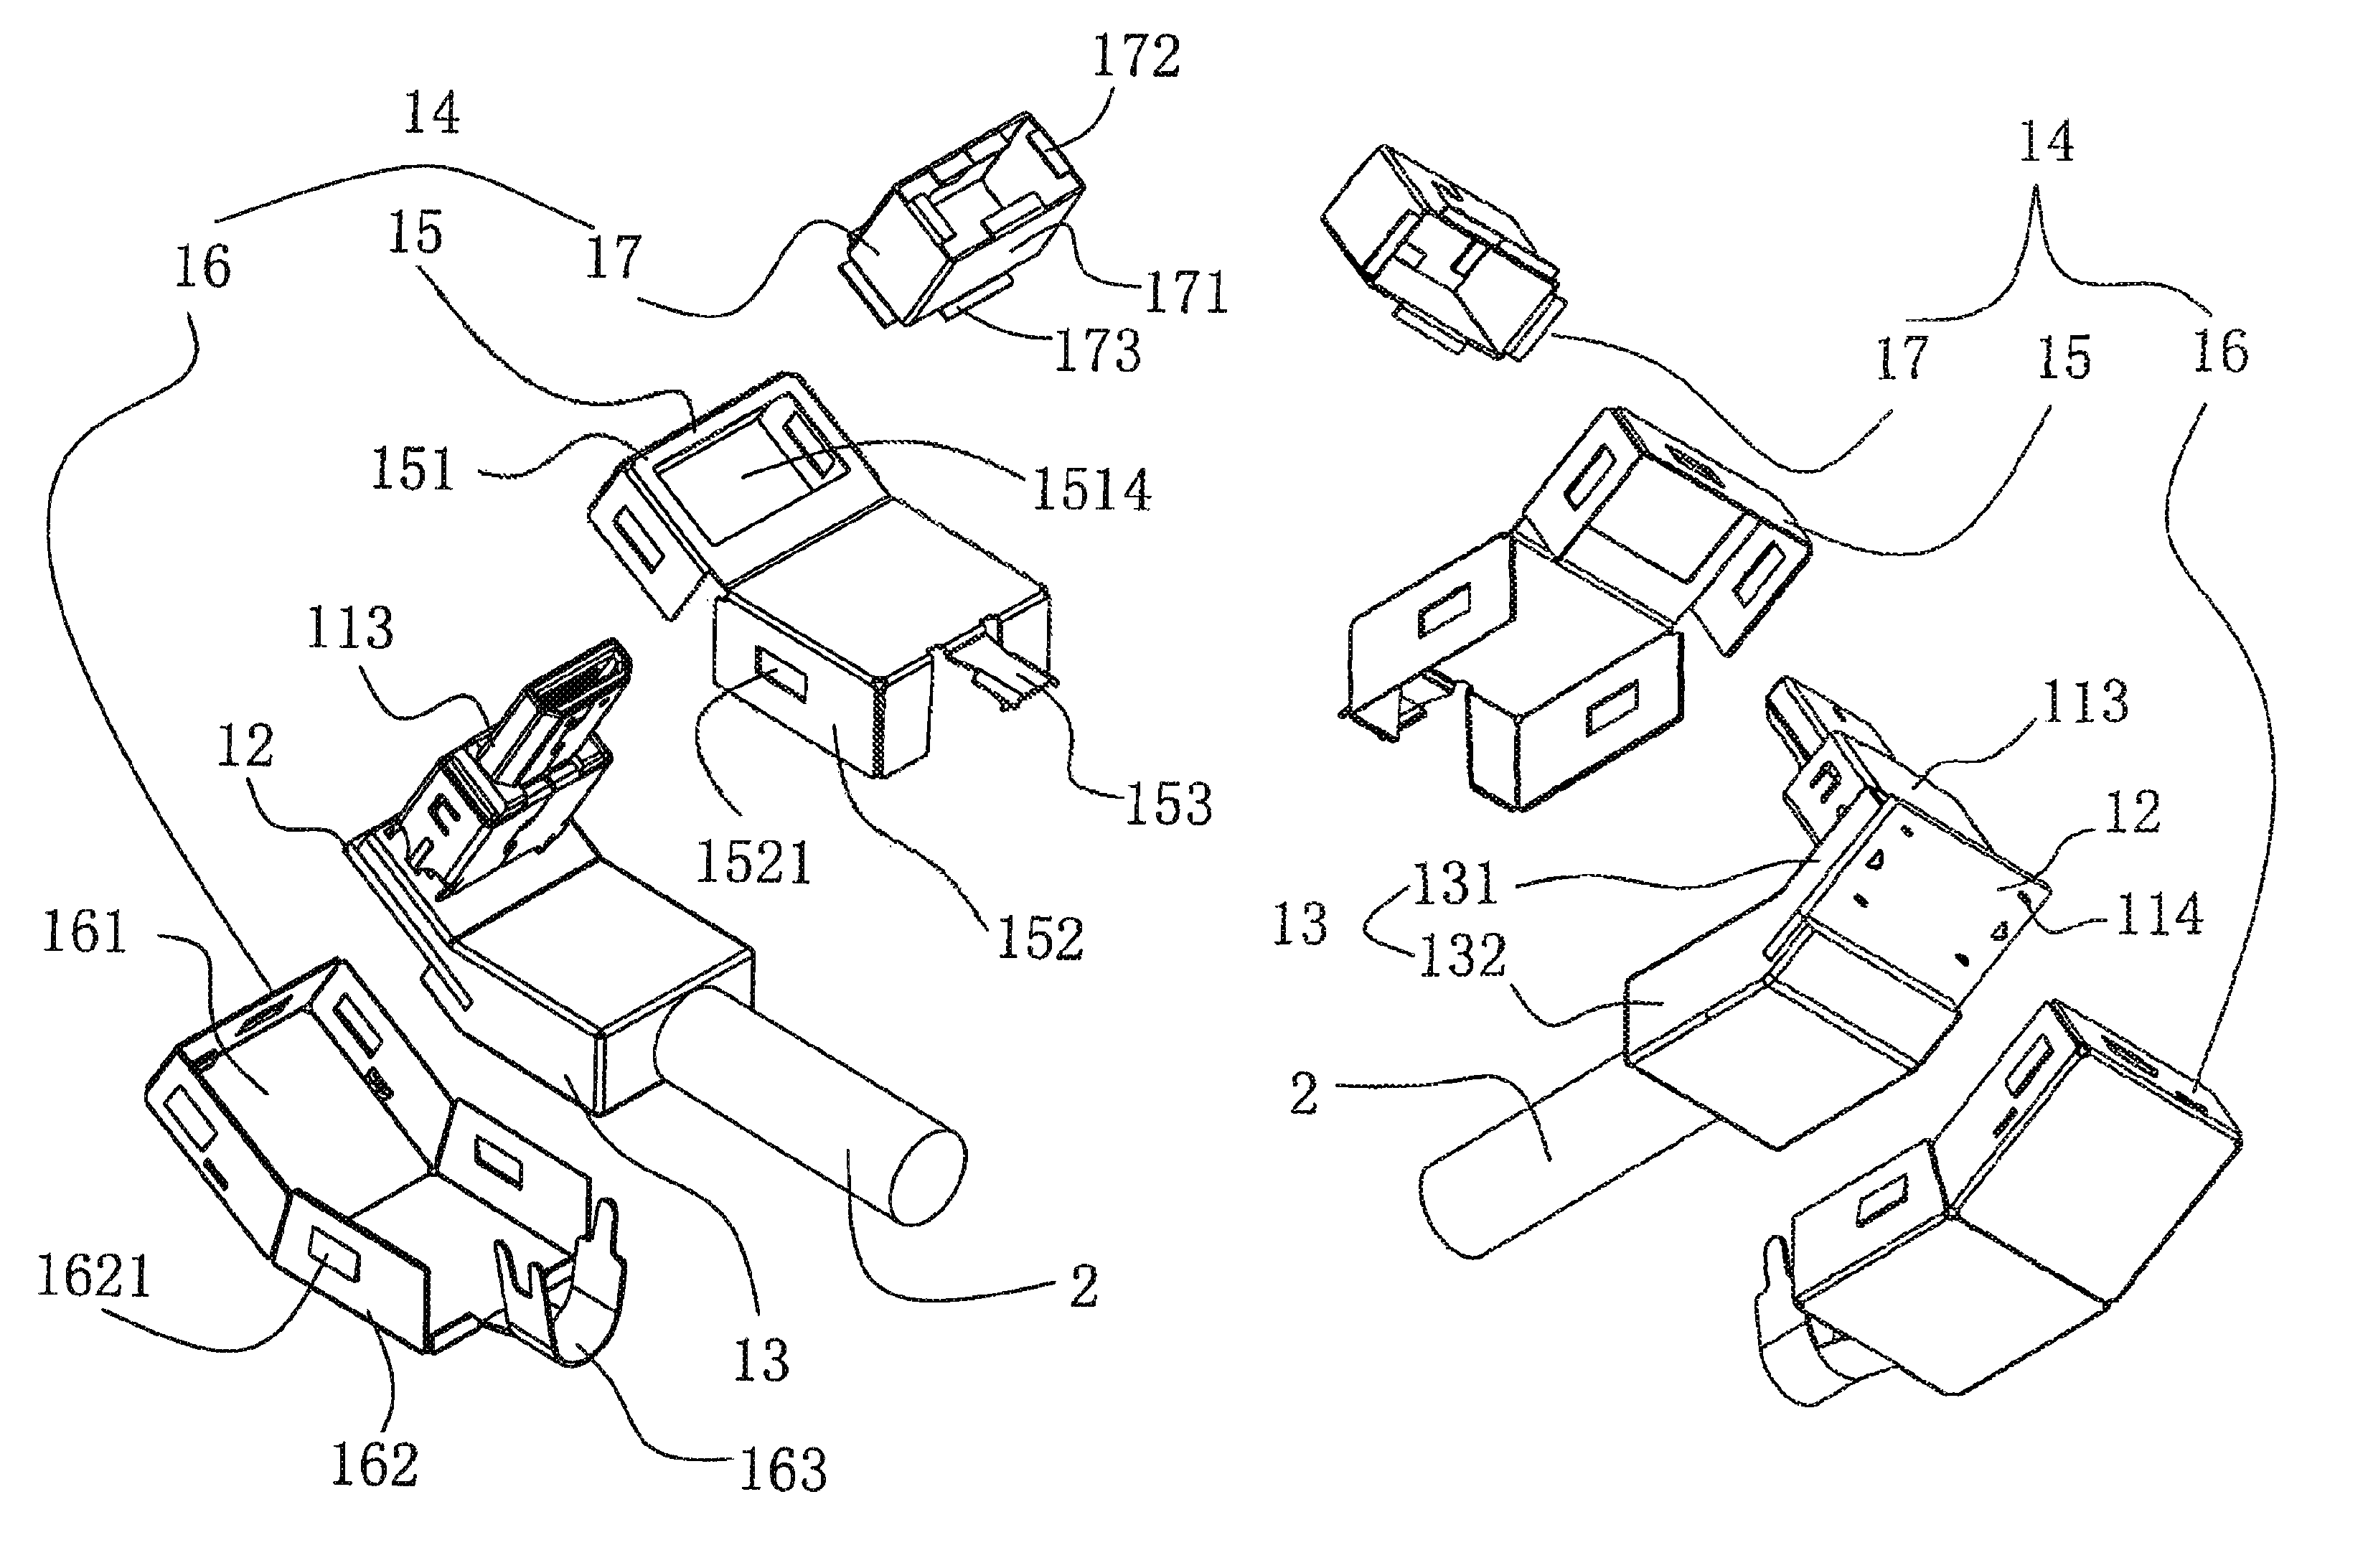 Cable connector having a circuit board partially encased by a coating and connected to a cable